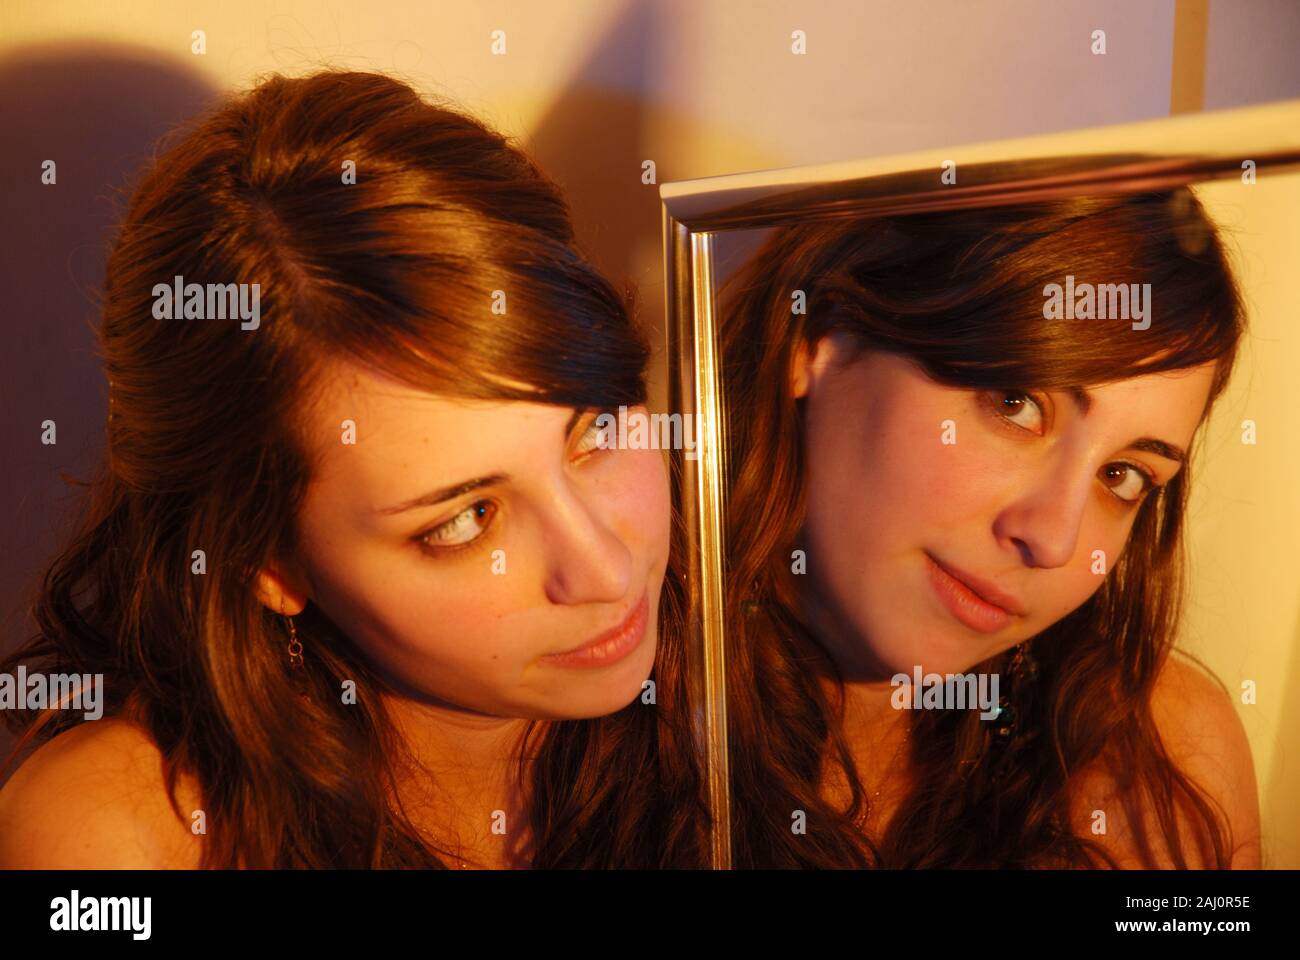 Young woman looking at the camera from her reflection on a mirror. Stock Photo